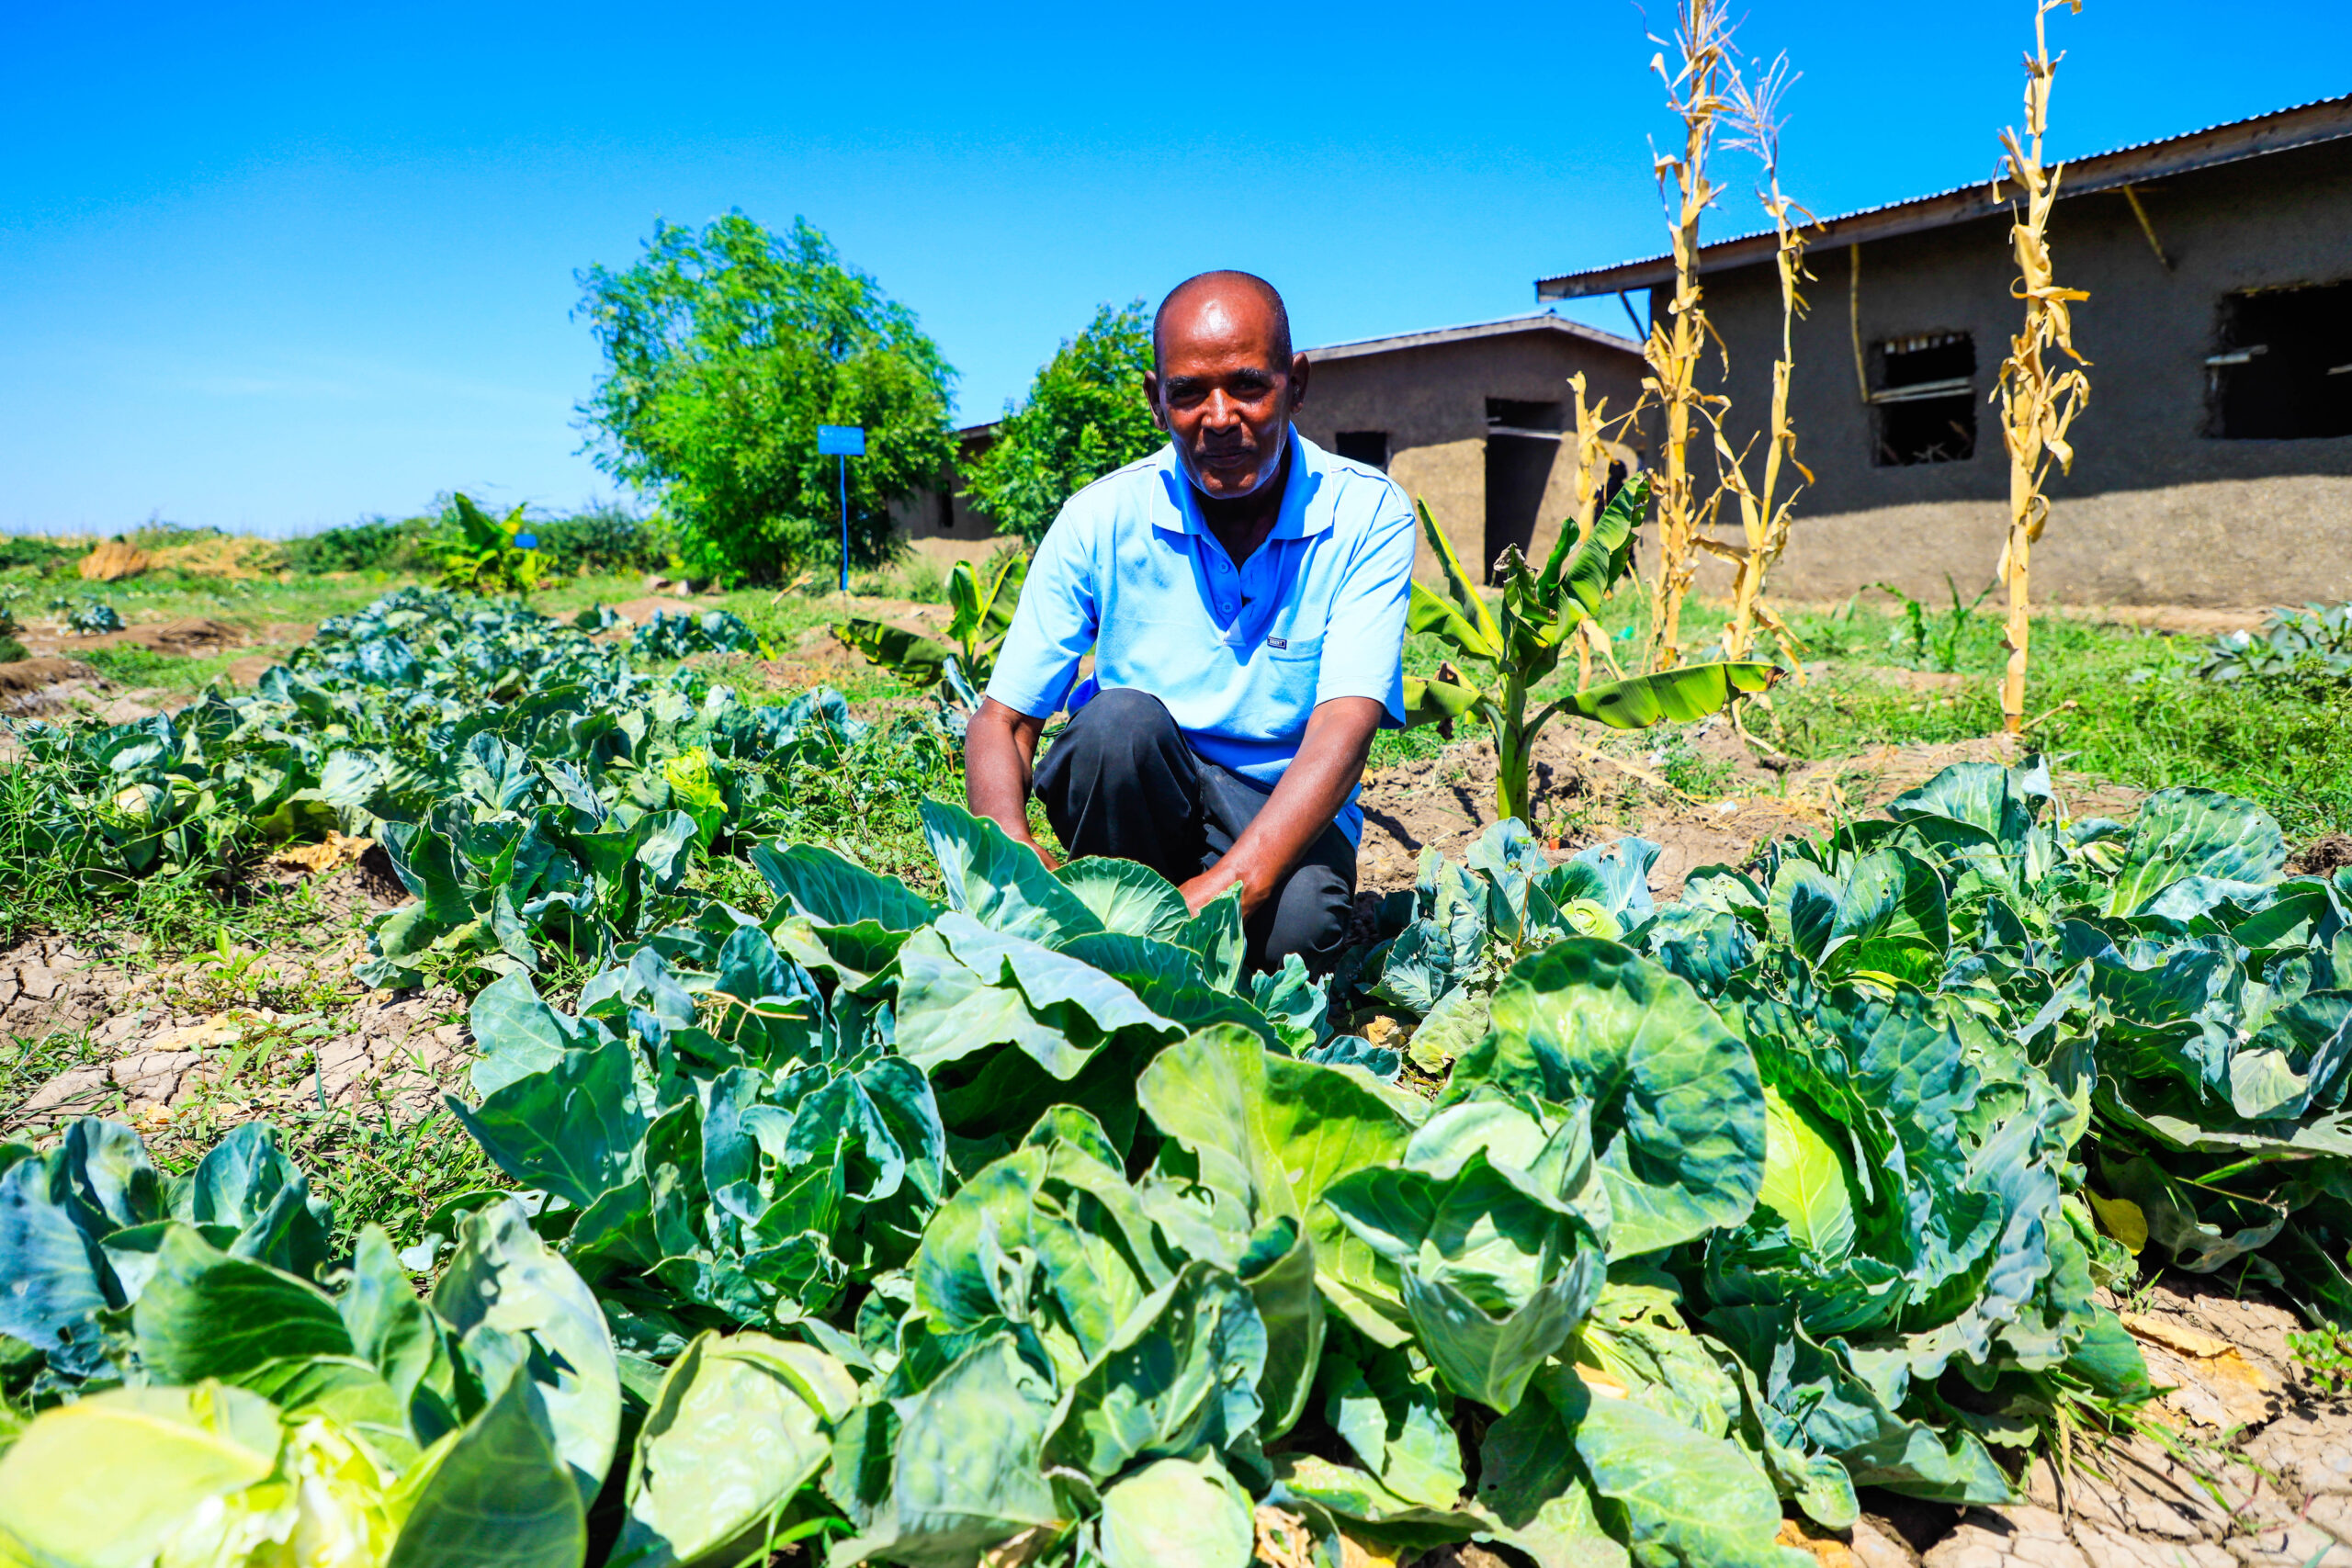 A farm worker tending to vegetables in Ethiopia